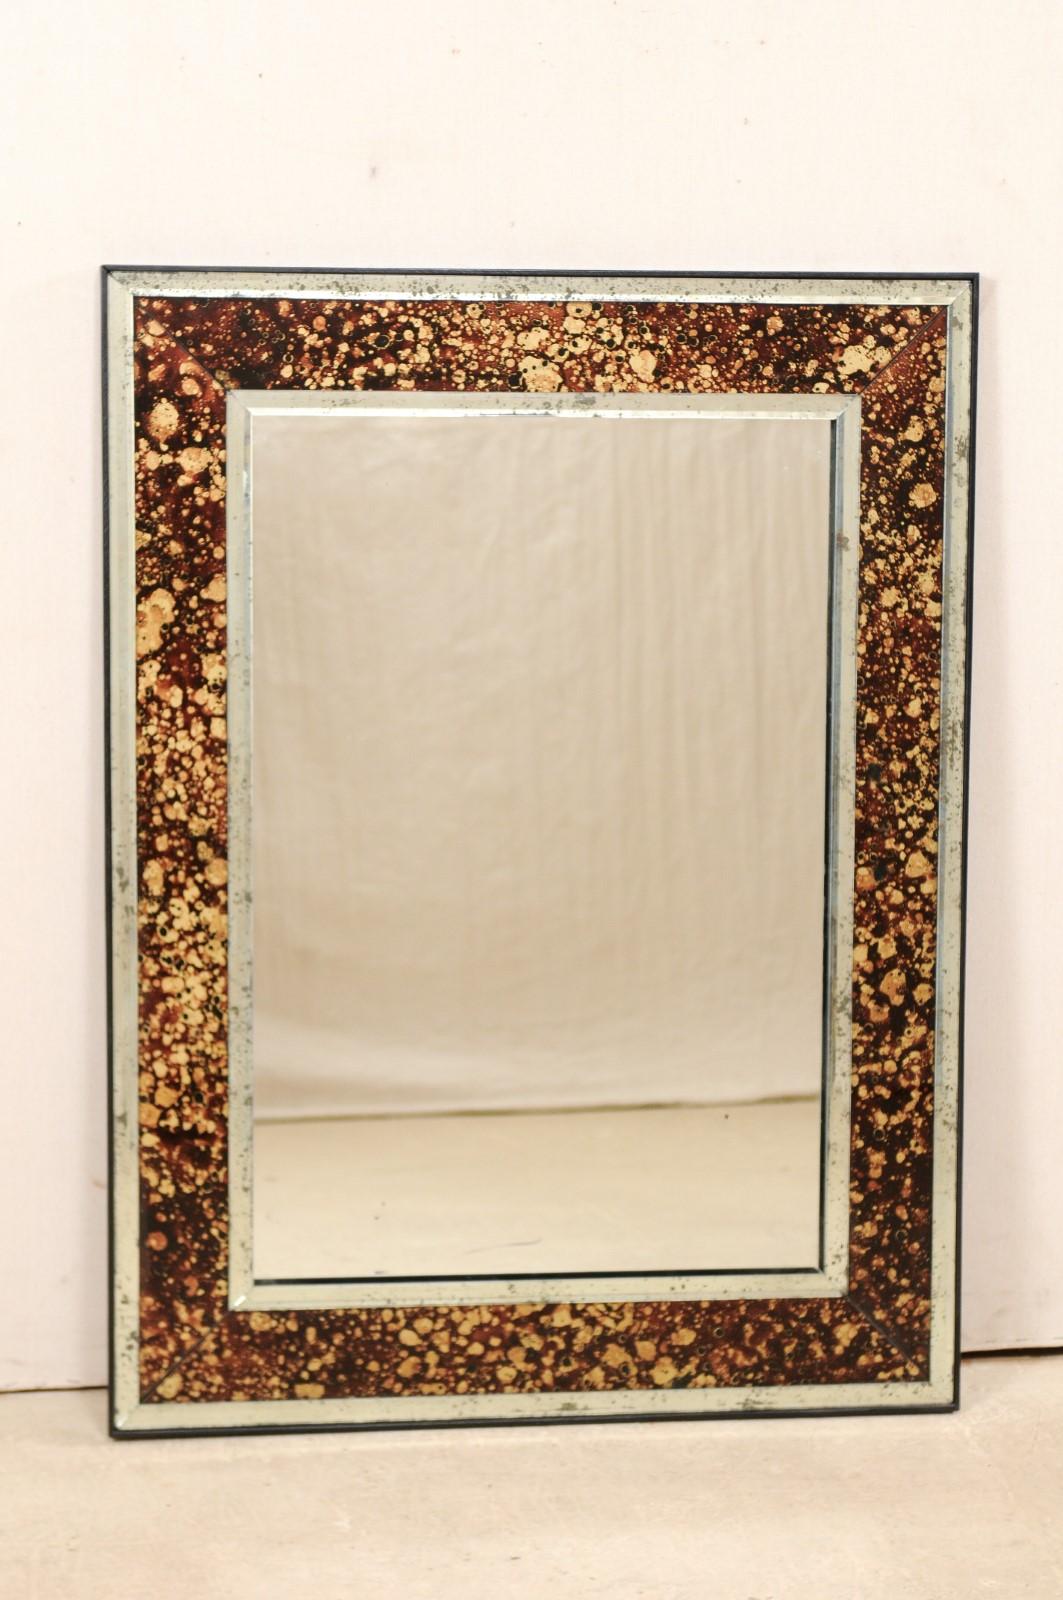 An American artisan made custom mirror with églomisé surround. This rectangular-shaped mirror features a fabulous faux tortoise églomisé surround, brown in color, framed within thinner antiqued mirror moldings. The tortoise coloring is primarily